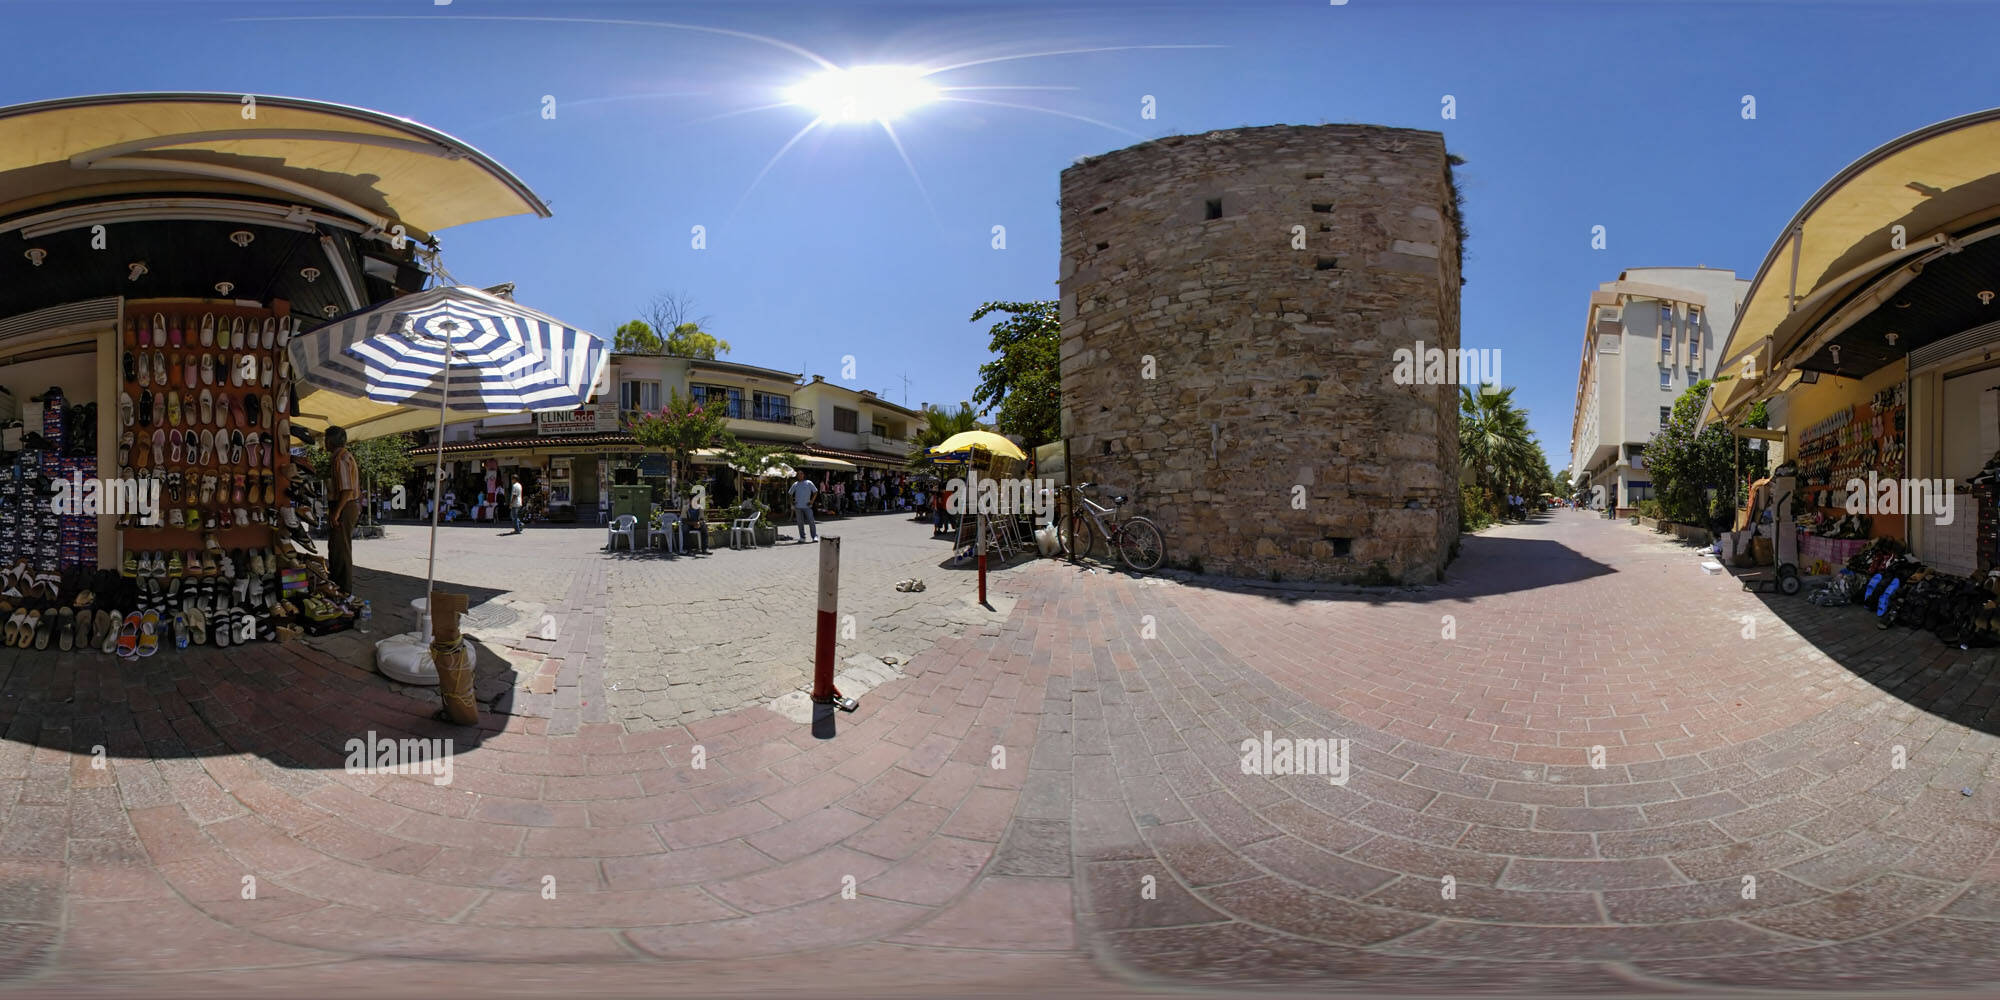 360 degree panoramic view of Old Wall